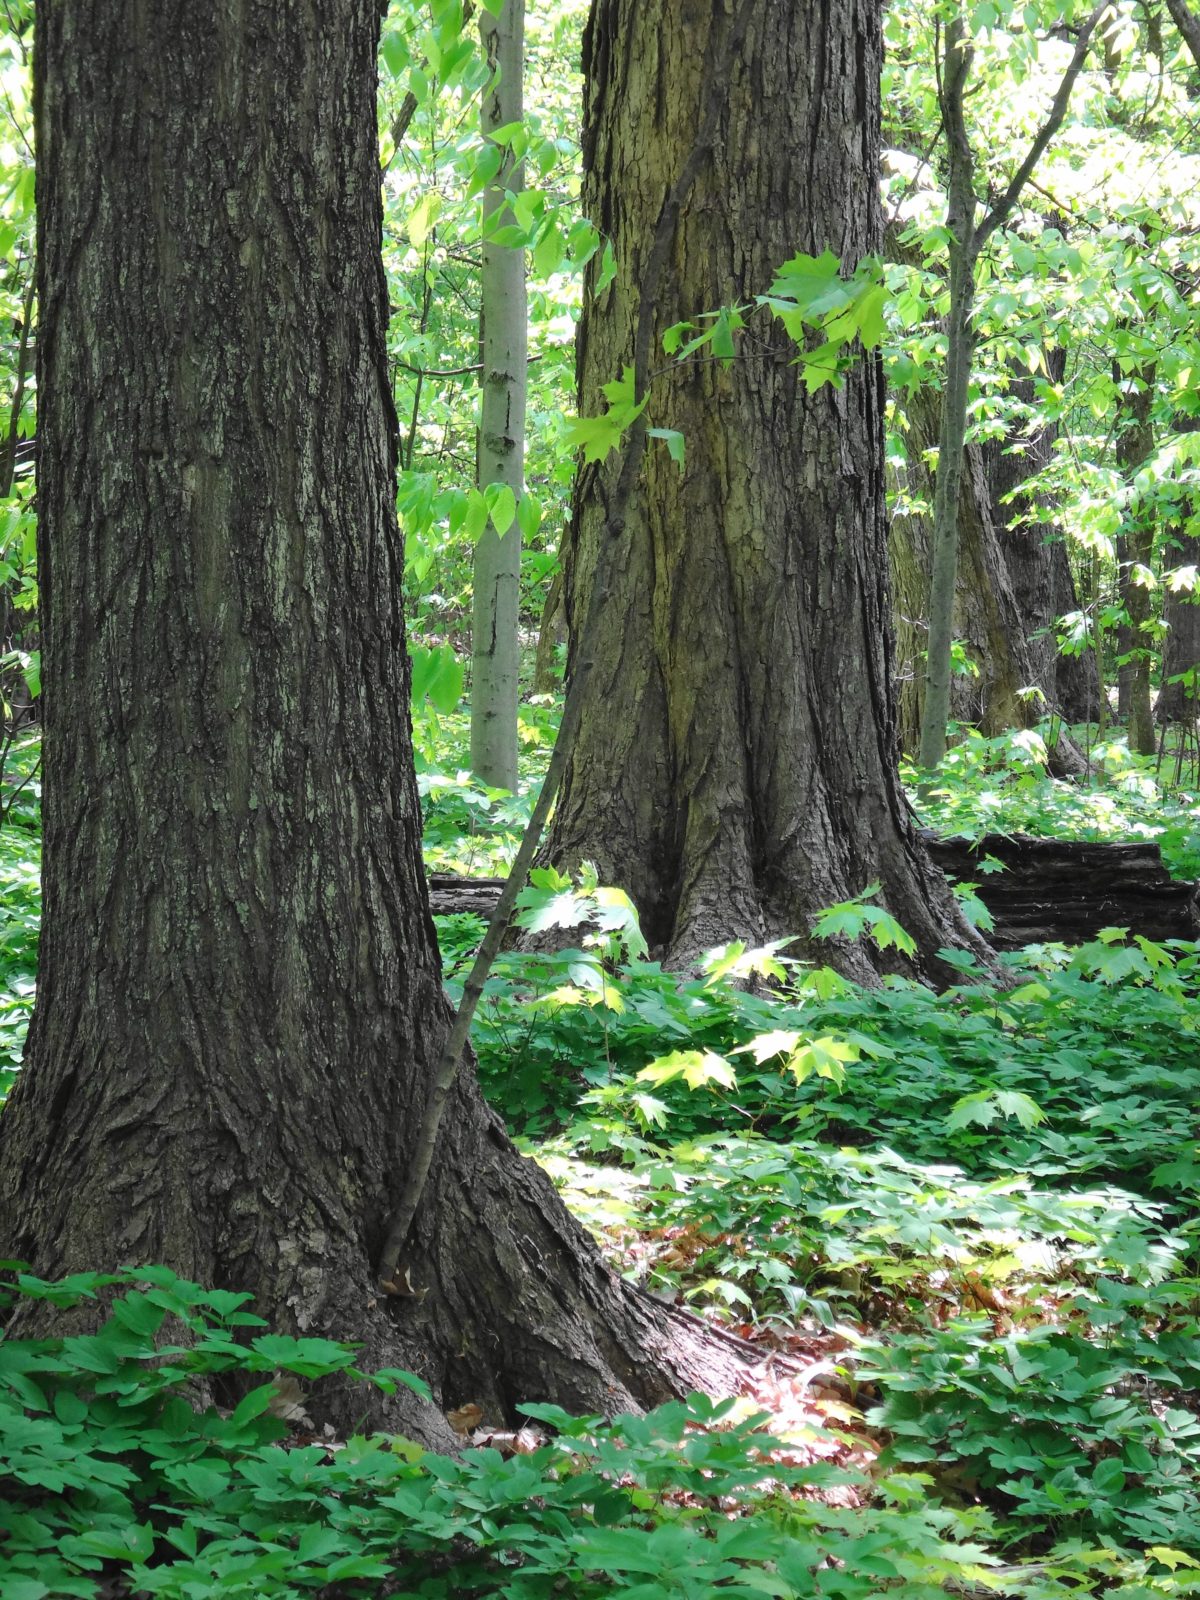 Two enormous maple tree trunks rise out the undergrowth in a sunlight patch of forest.